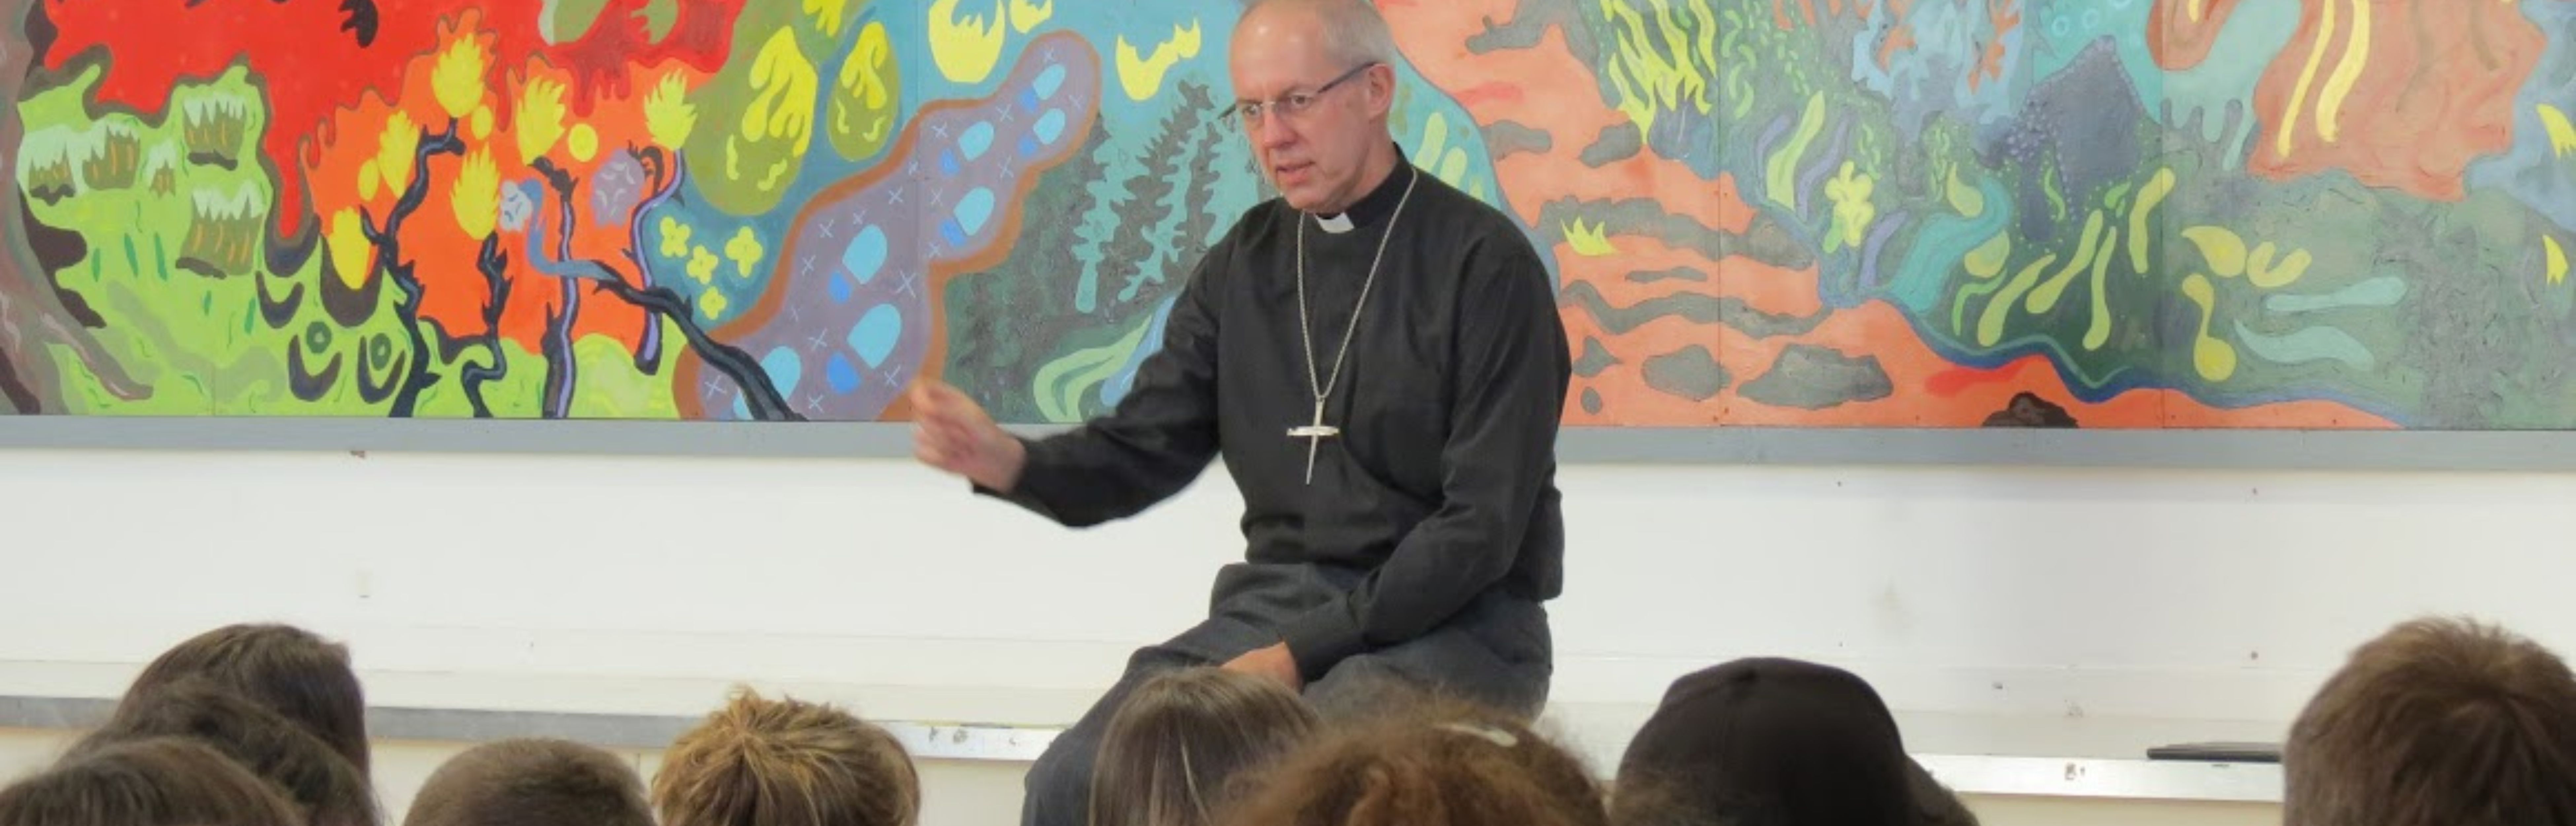 The Archbishop of Canterbury talks with students during his last visit to Bath and Wells in 2016.